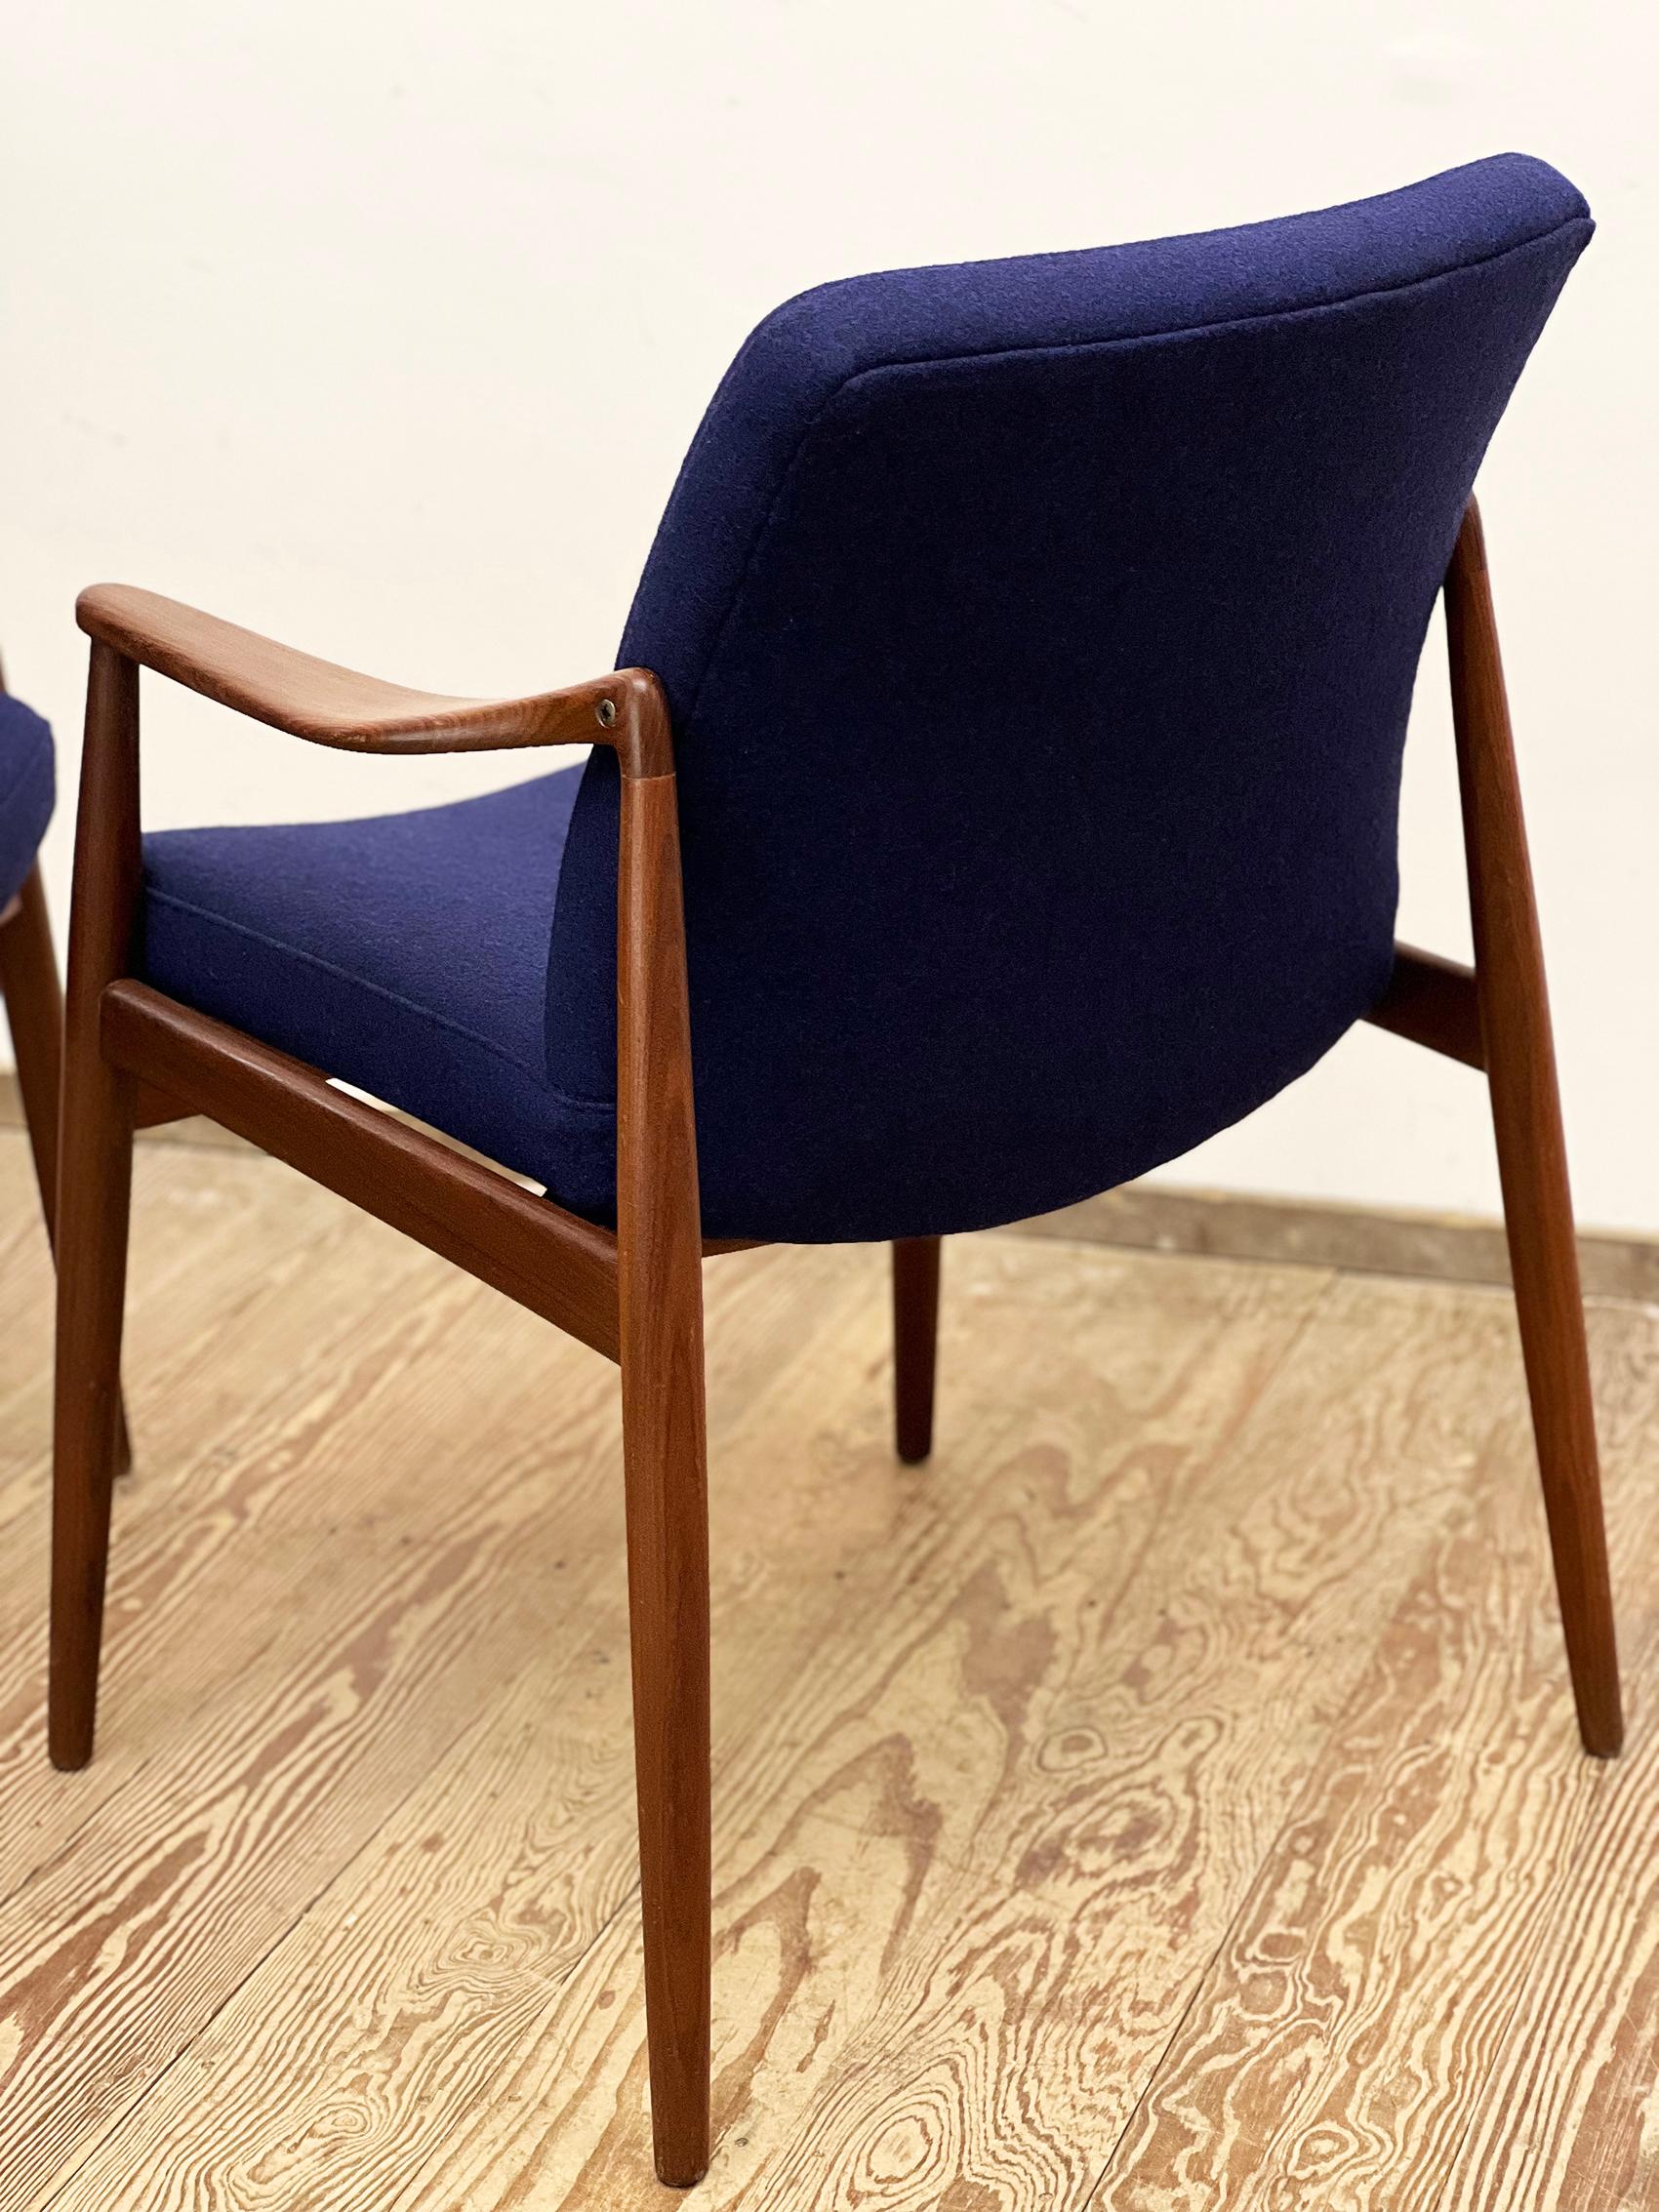 Two Mid-Century Modern Teak Armchairs by Hartmut Lohmeyer for Wilkhahn, 1950s For Sale 4